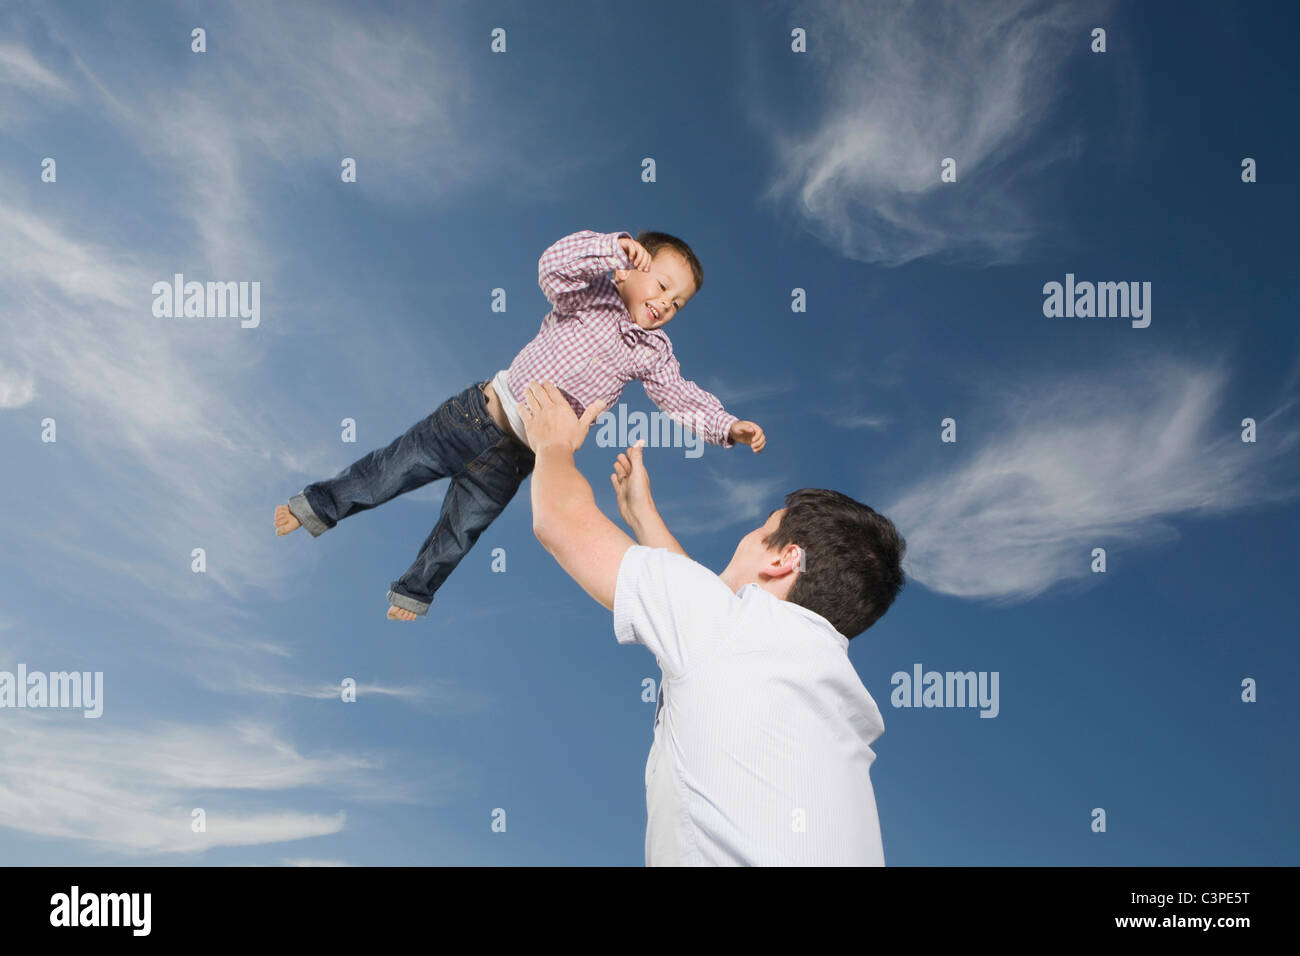 Germany, Schleswig Holstein, Amrum, Father lifting son (3-4) in the air, portrait Stock Photo